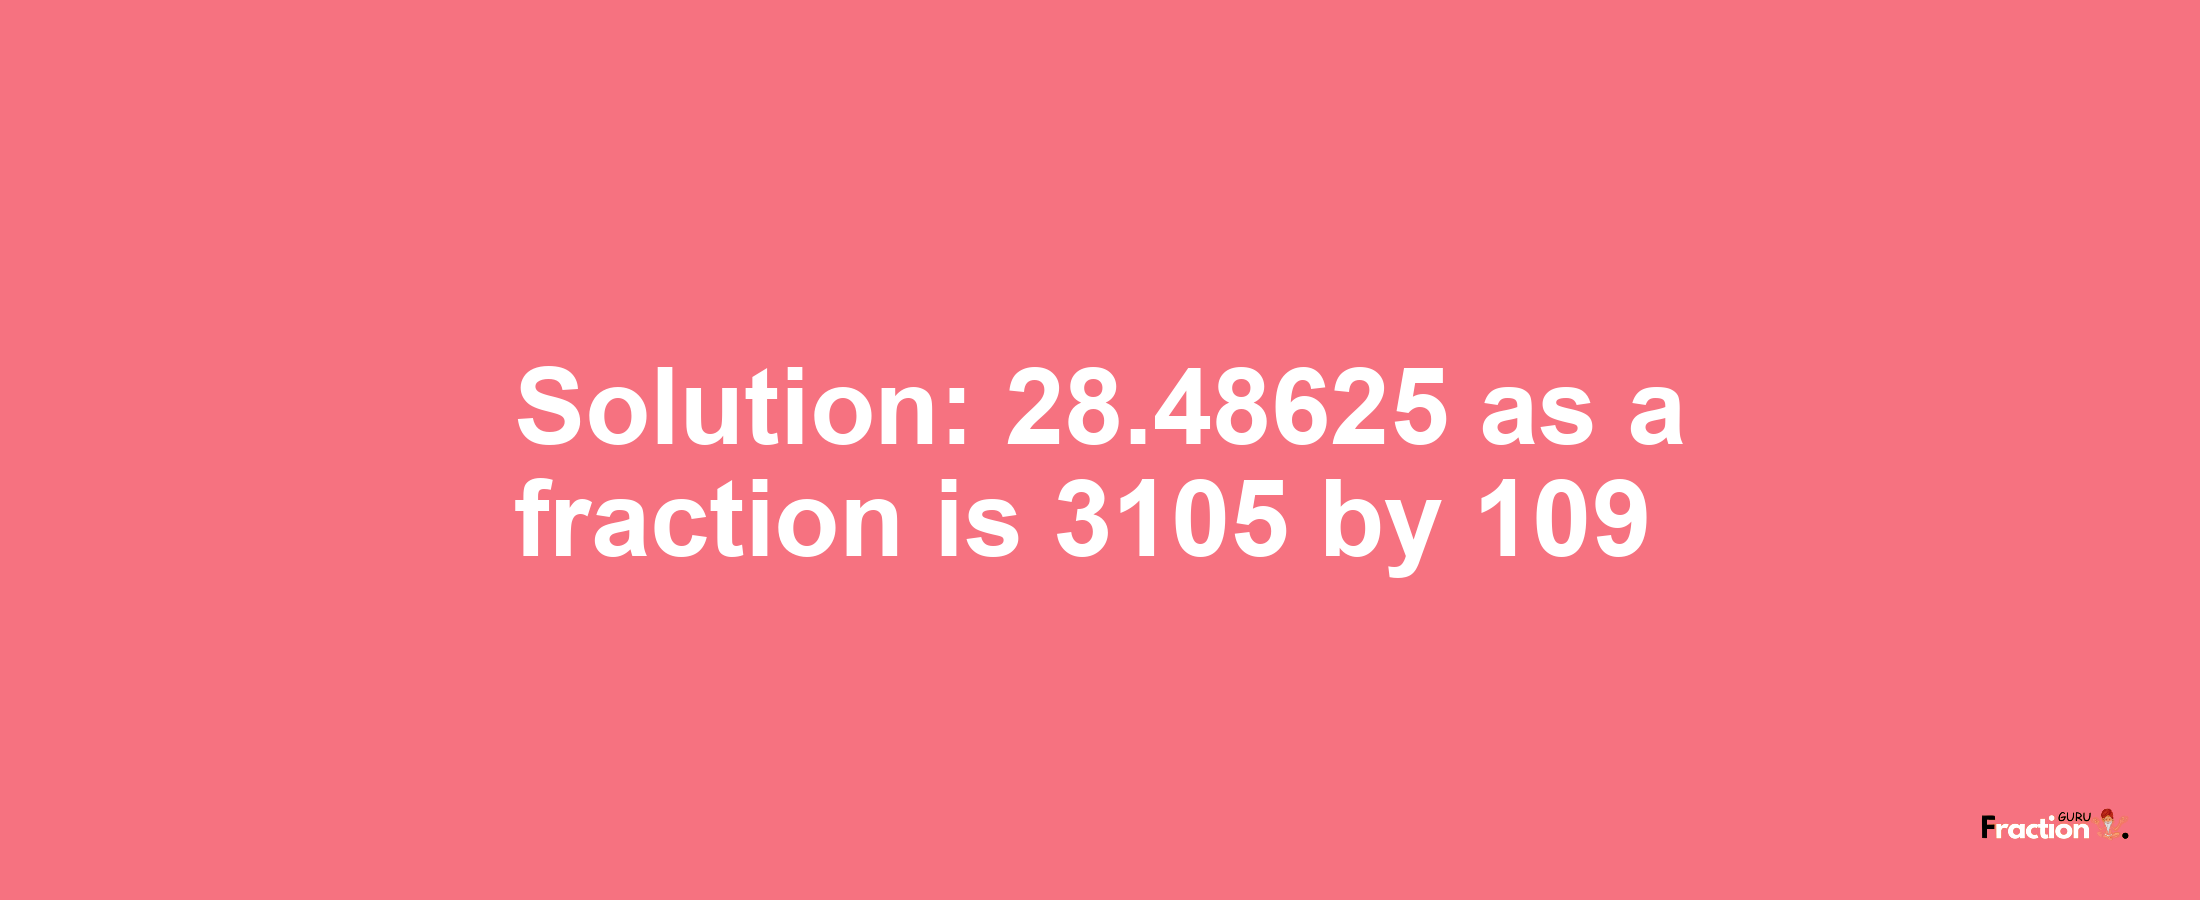 Solution:28.48625 as a fraction is 3105/109